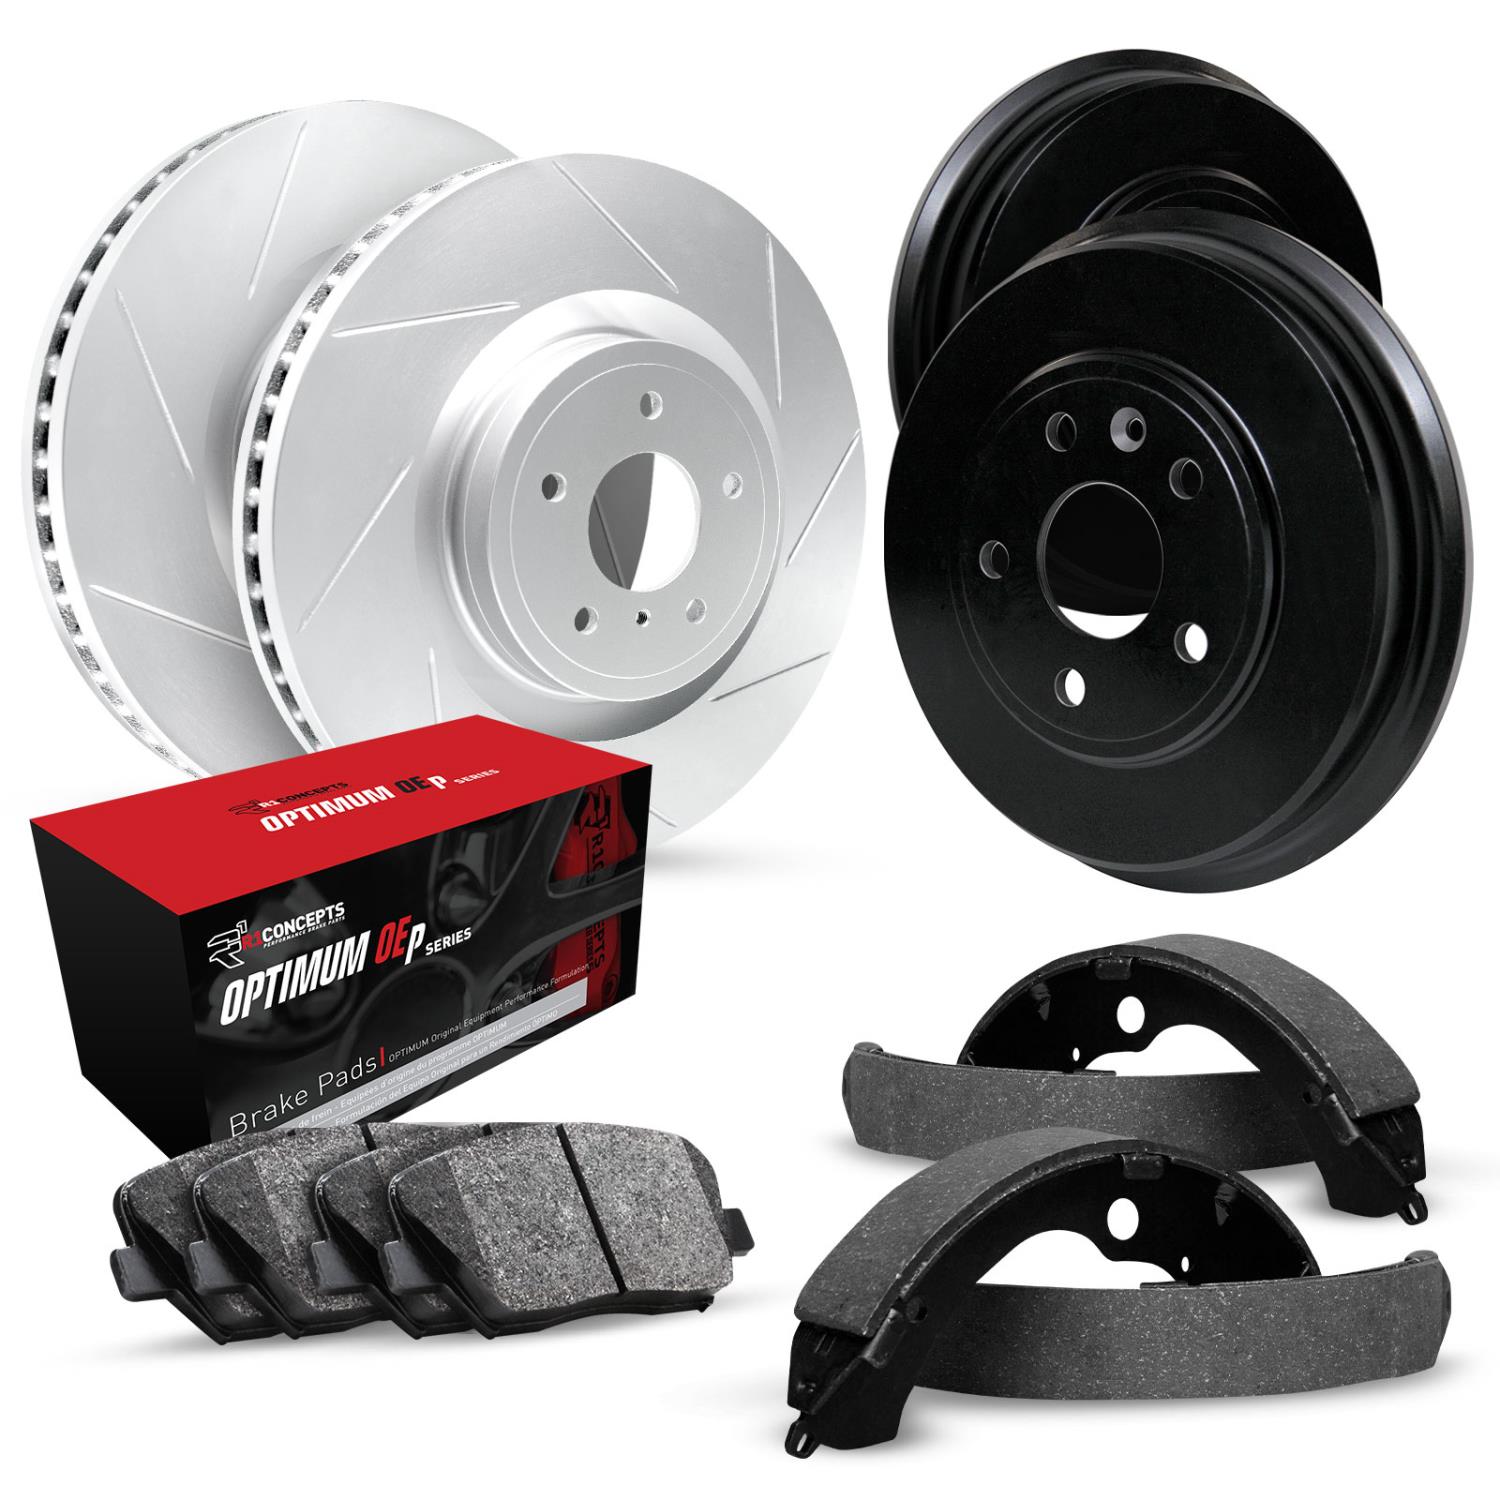 GEO-Carbon Slotted Brake Rotor & Drum Set w/Optimum OE Pads & Shoes, 1988-1991 GM, Position: Front & Rear